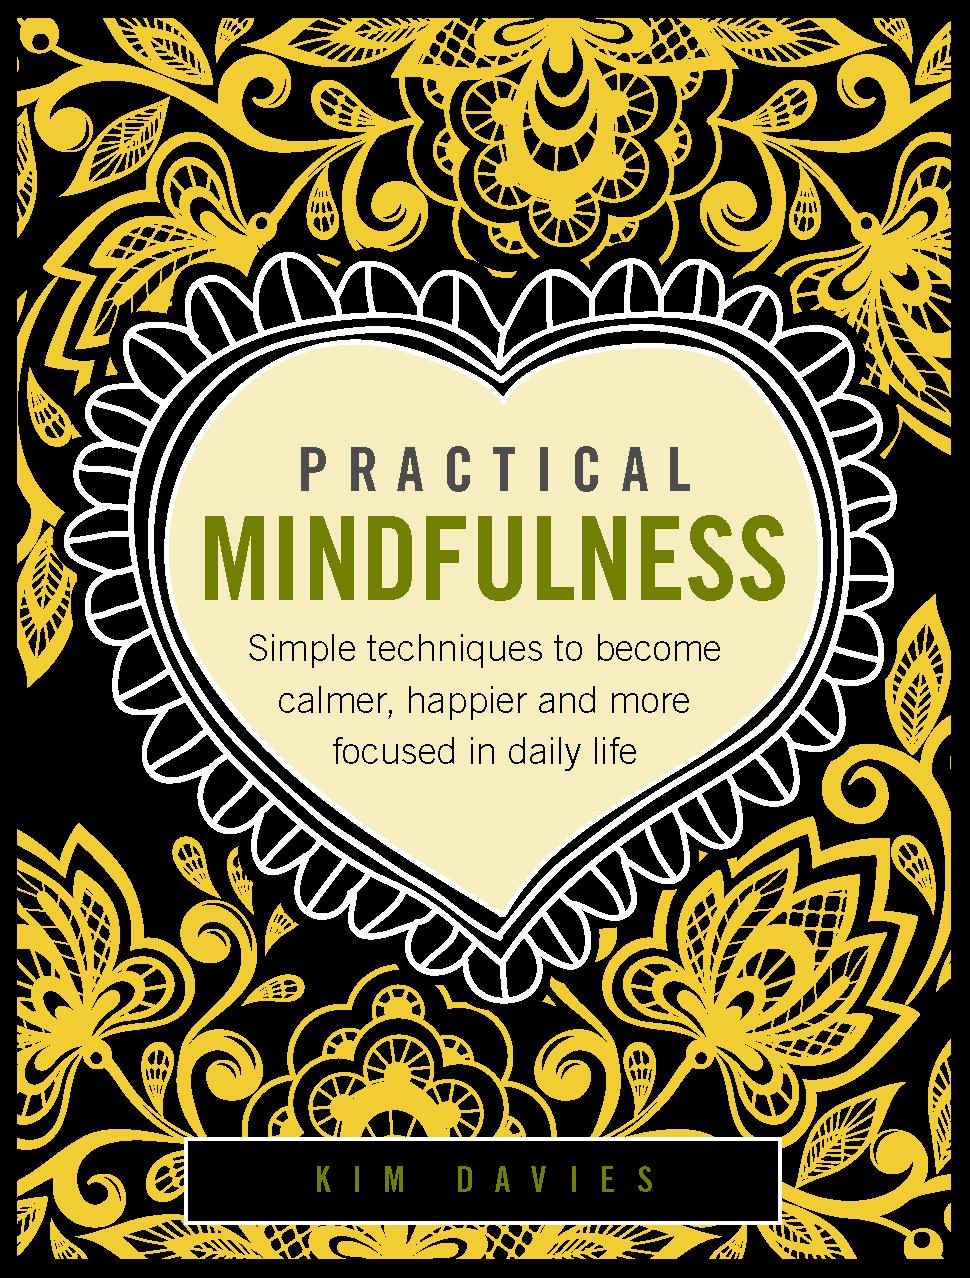 NEW AGE New Titles PRACTICAL MINDFULNESS Simple techniques to become calmer, happier and more focused in daily life Kim Davies Learn about the ancient practice of